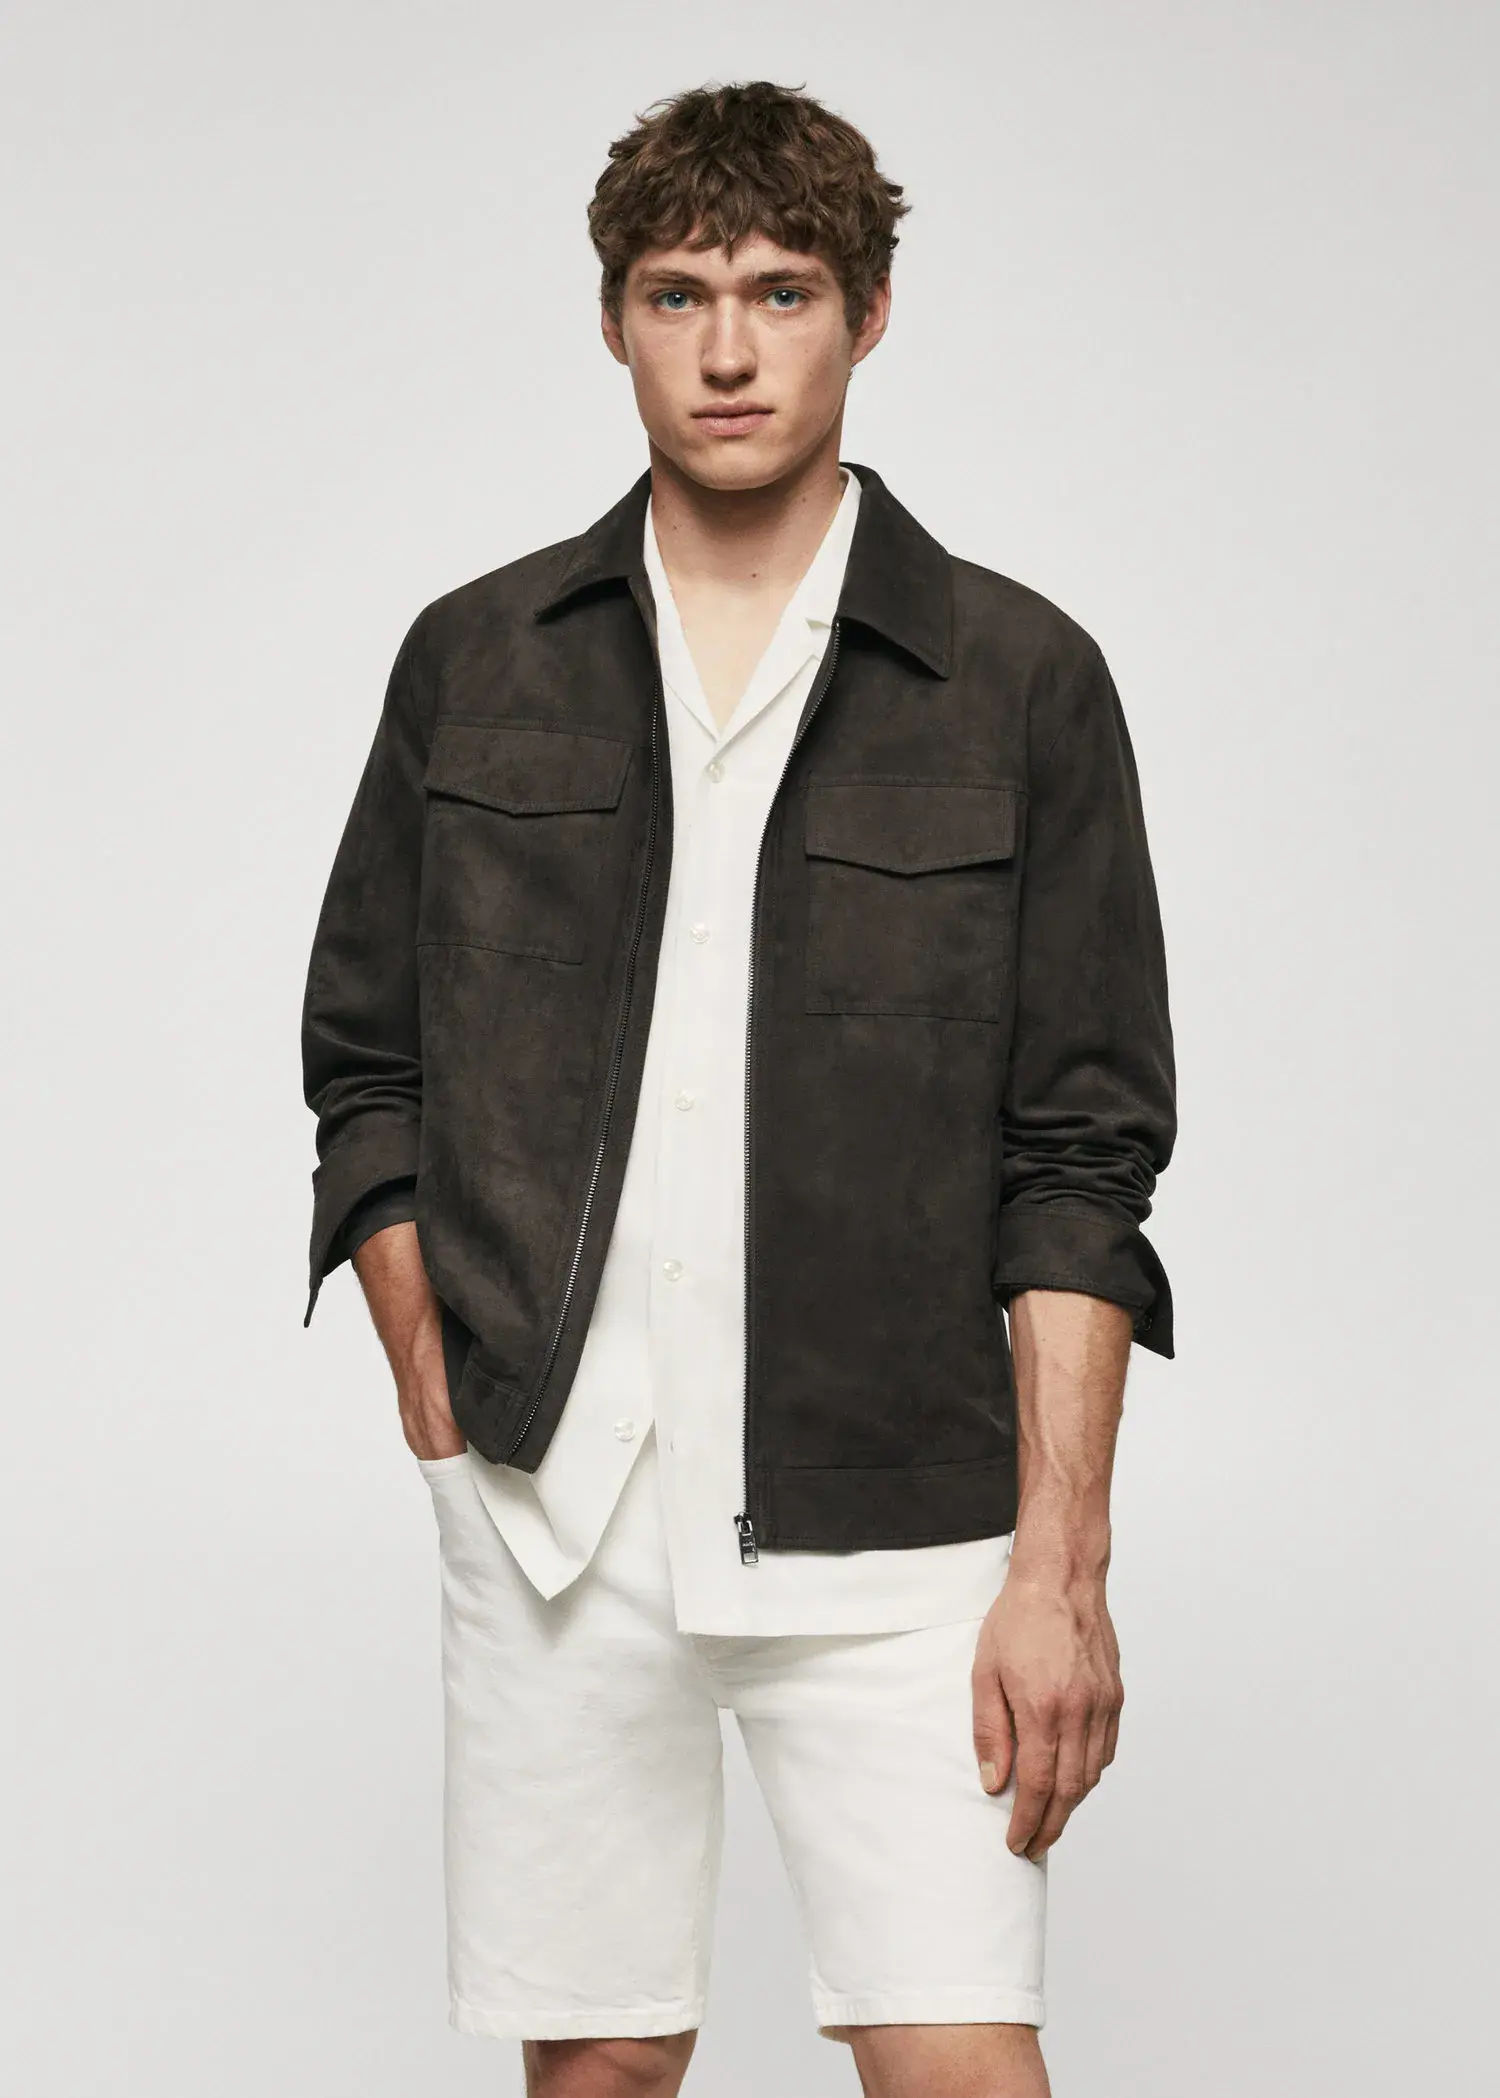 Mango Suede effect jacket. a man wearing a black jacket and white pants. 